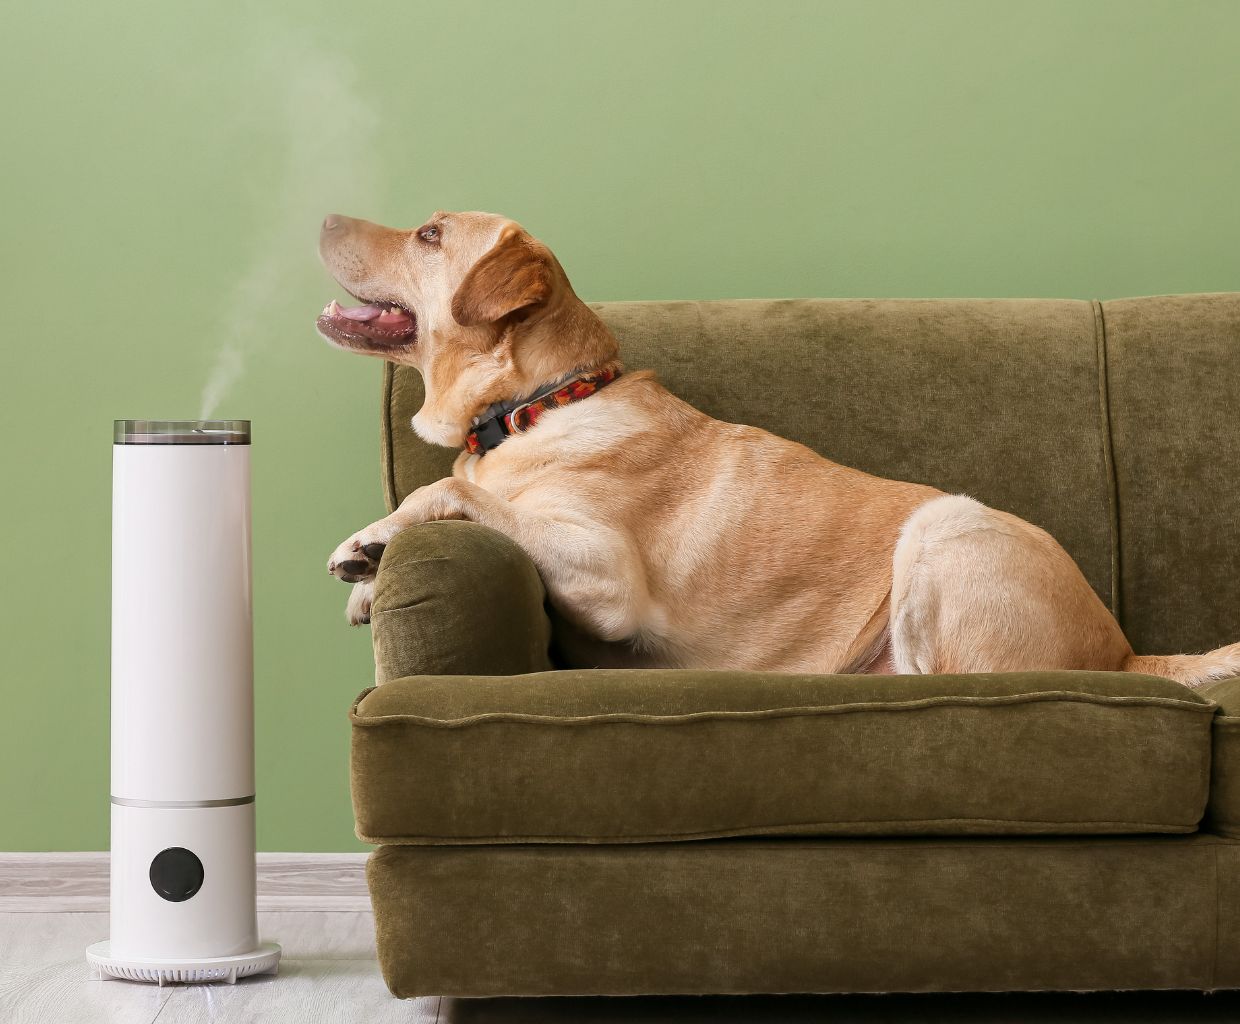 Best Air Purifier For Pets, Dander, Hair, And Odors